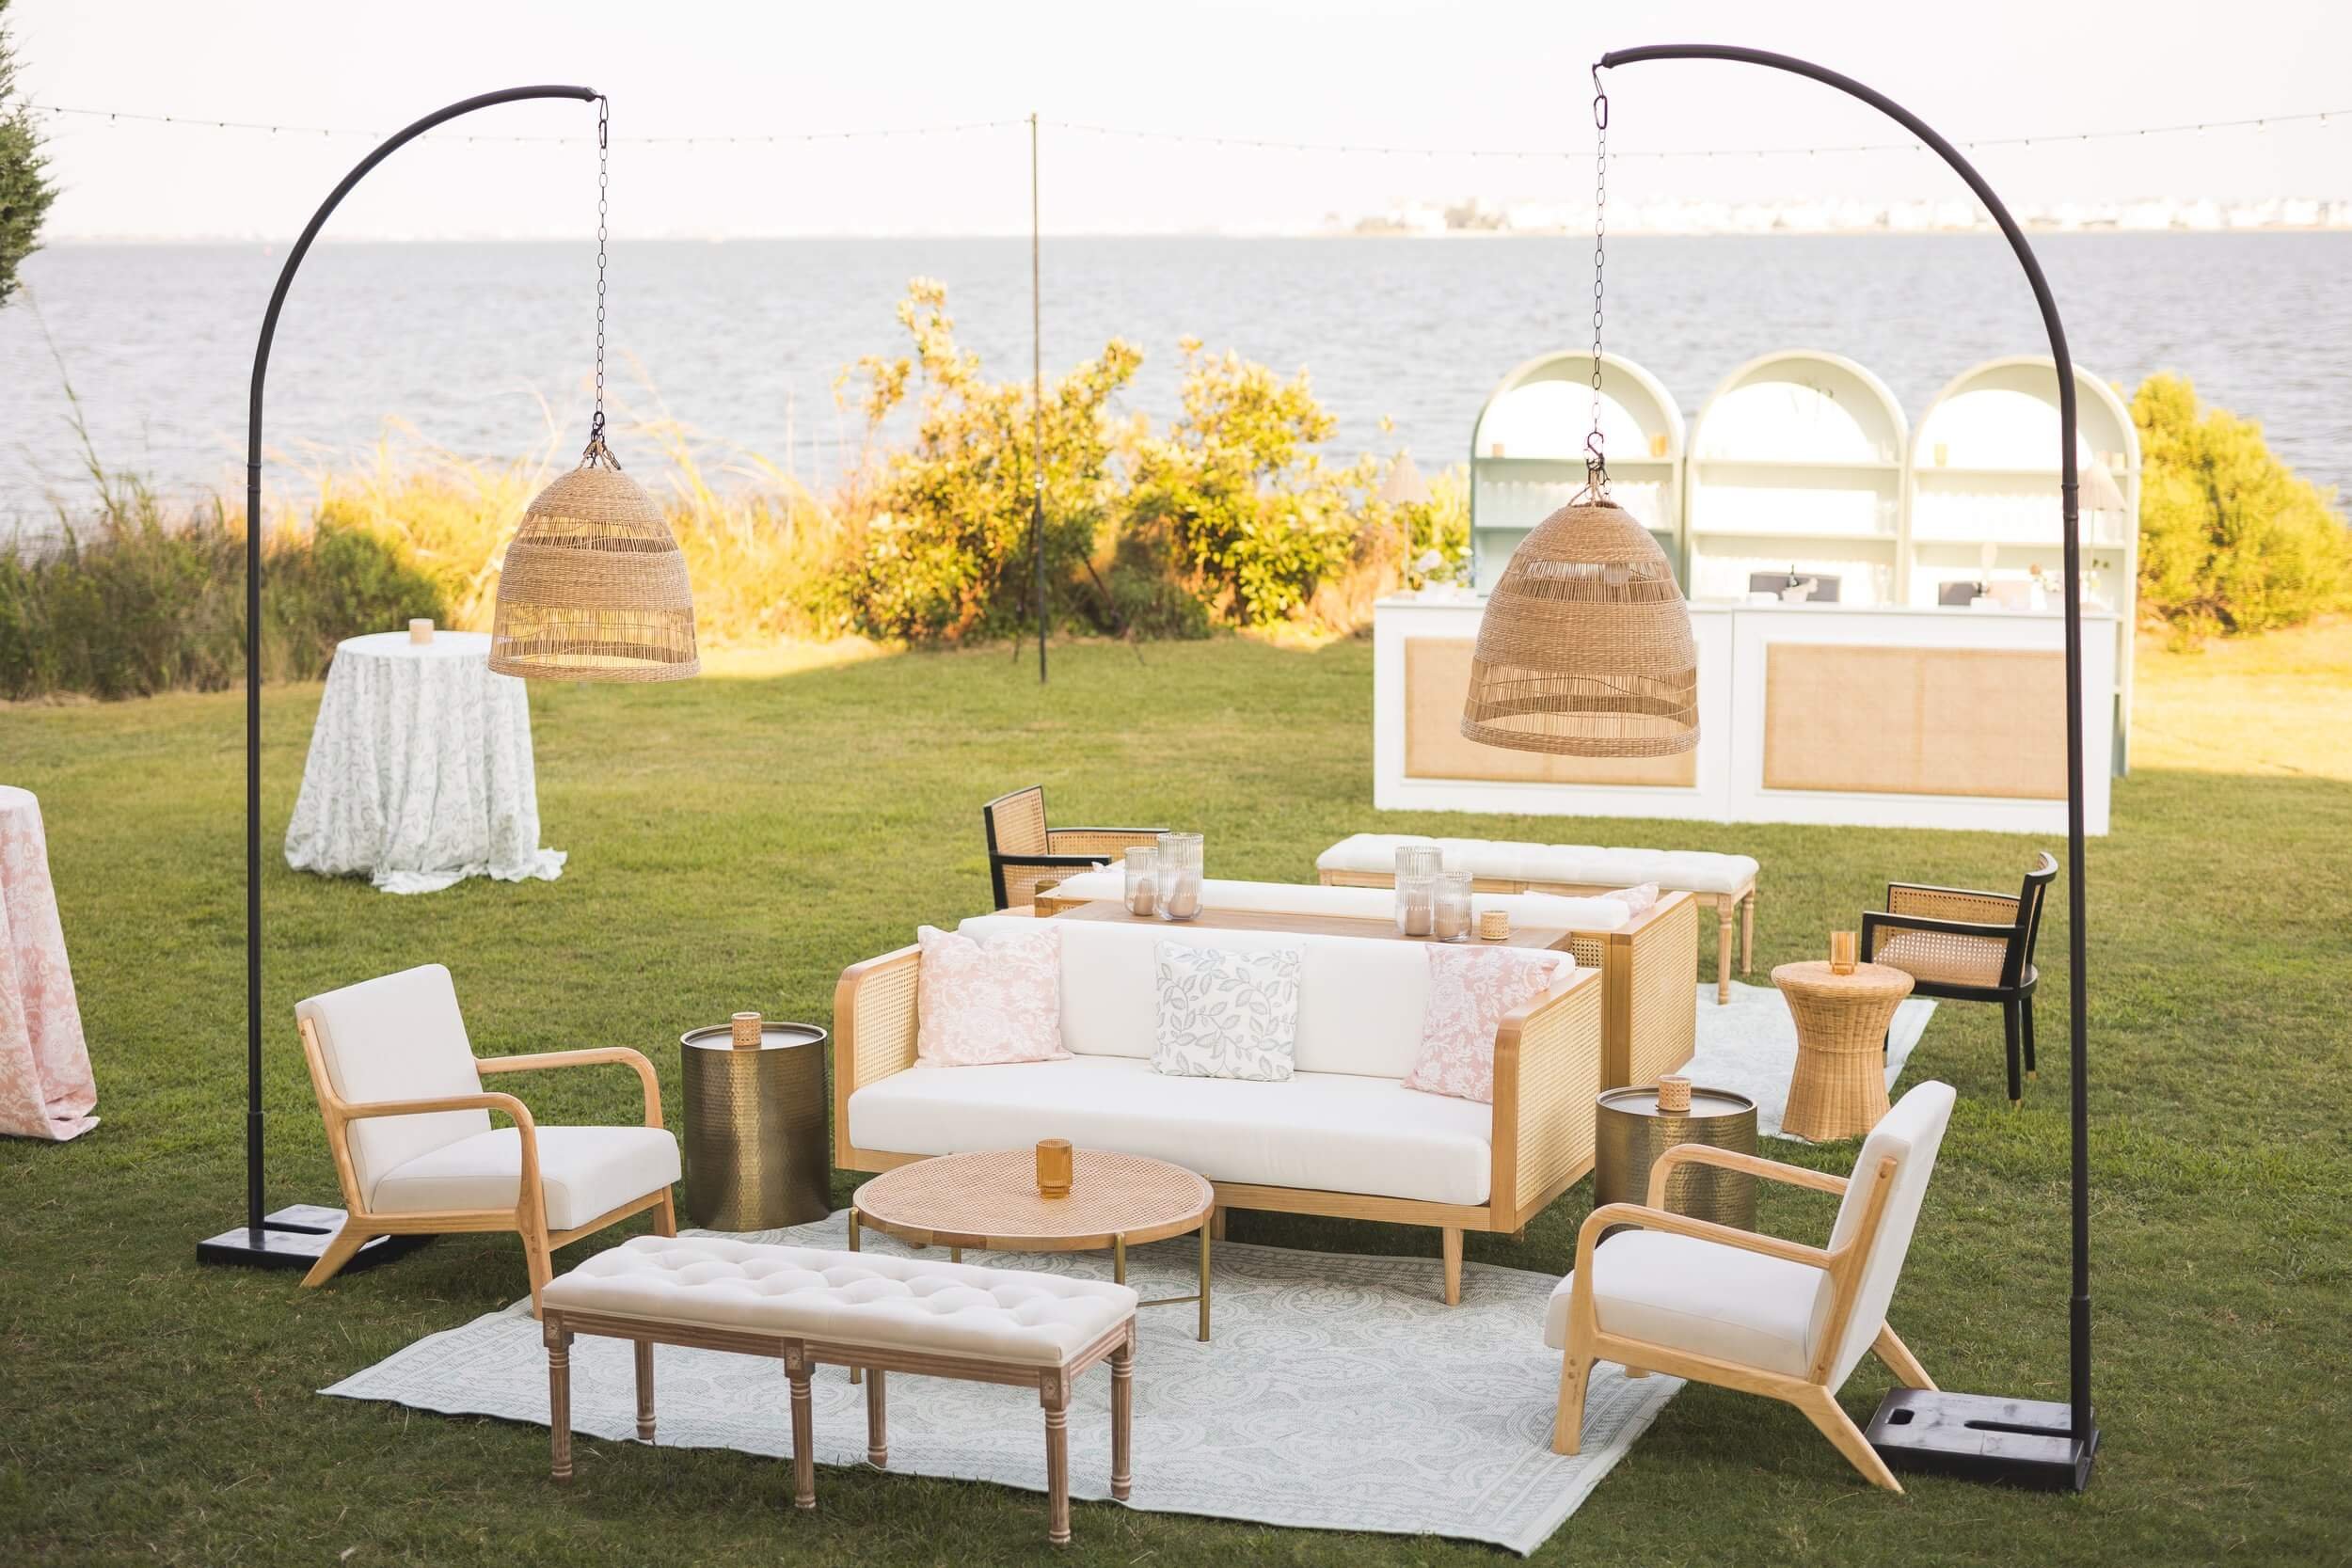  An outdoor living room lounge collection with white furniture and wicker chairs on the OBX sound. 